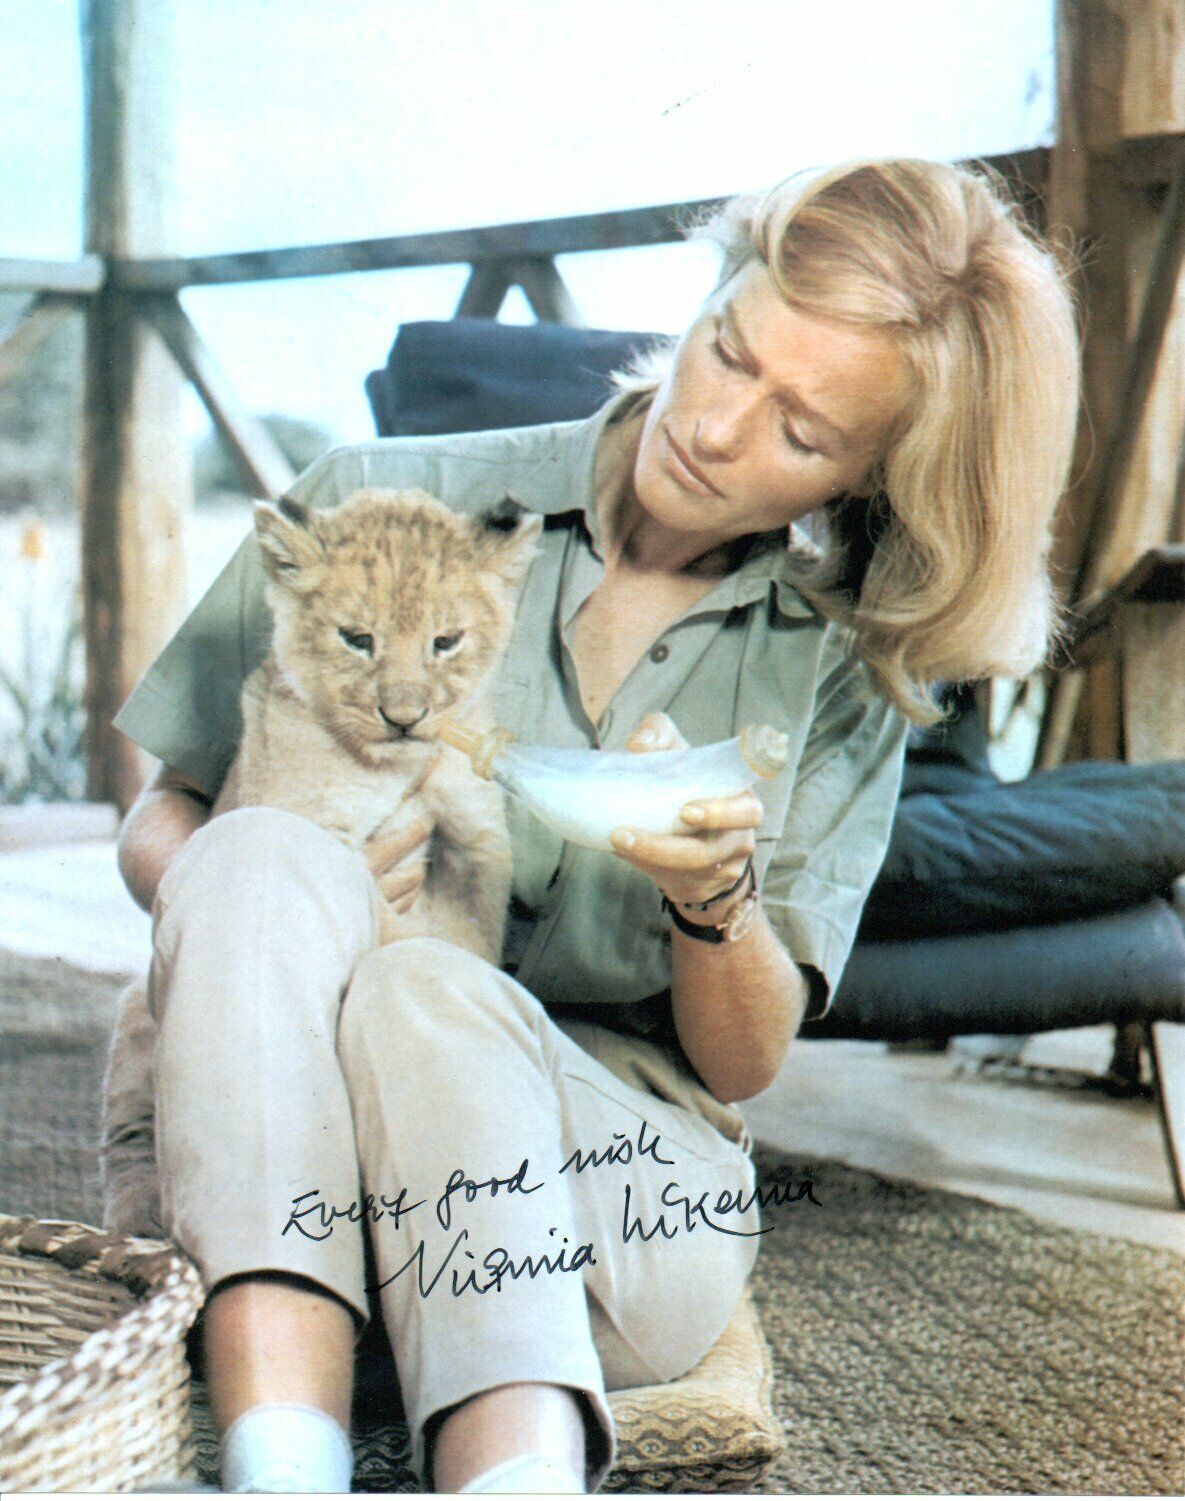 Virginia McKenna Signed 10 by 8 inches Genuine Signature Photo Poster painting Autograph